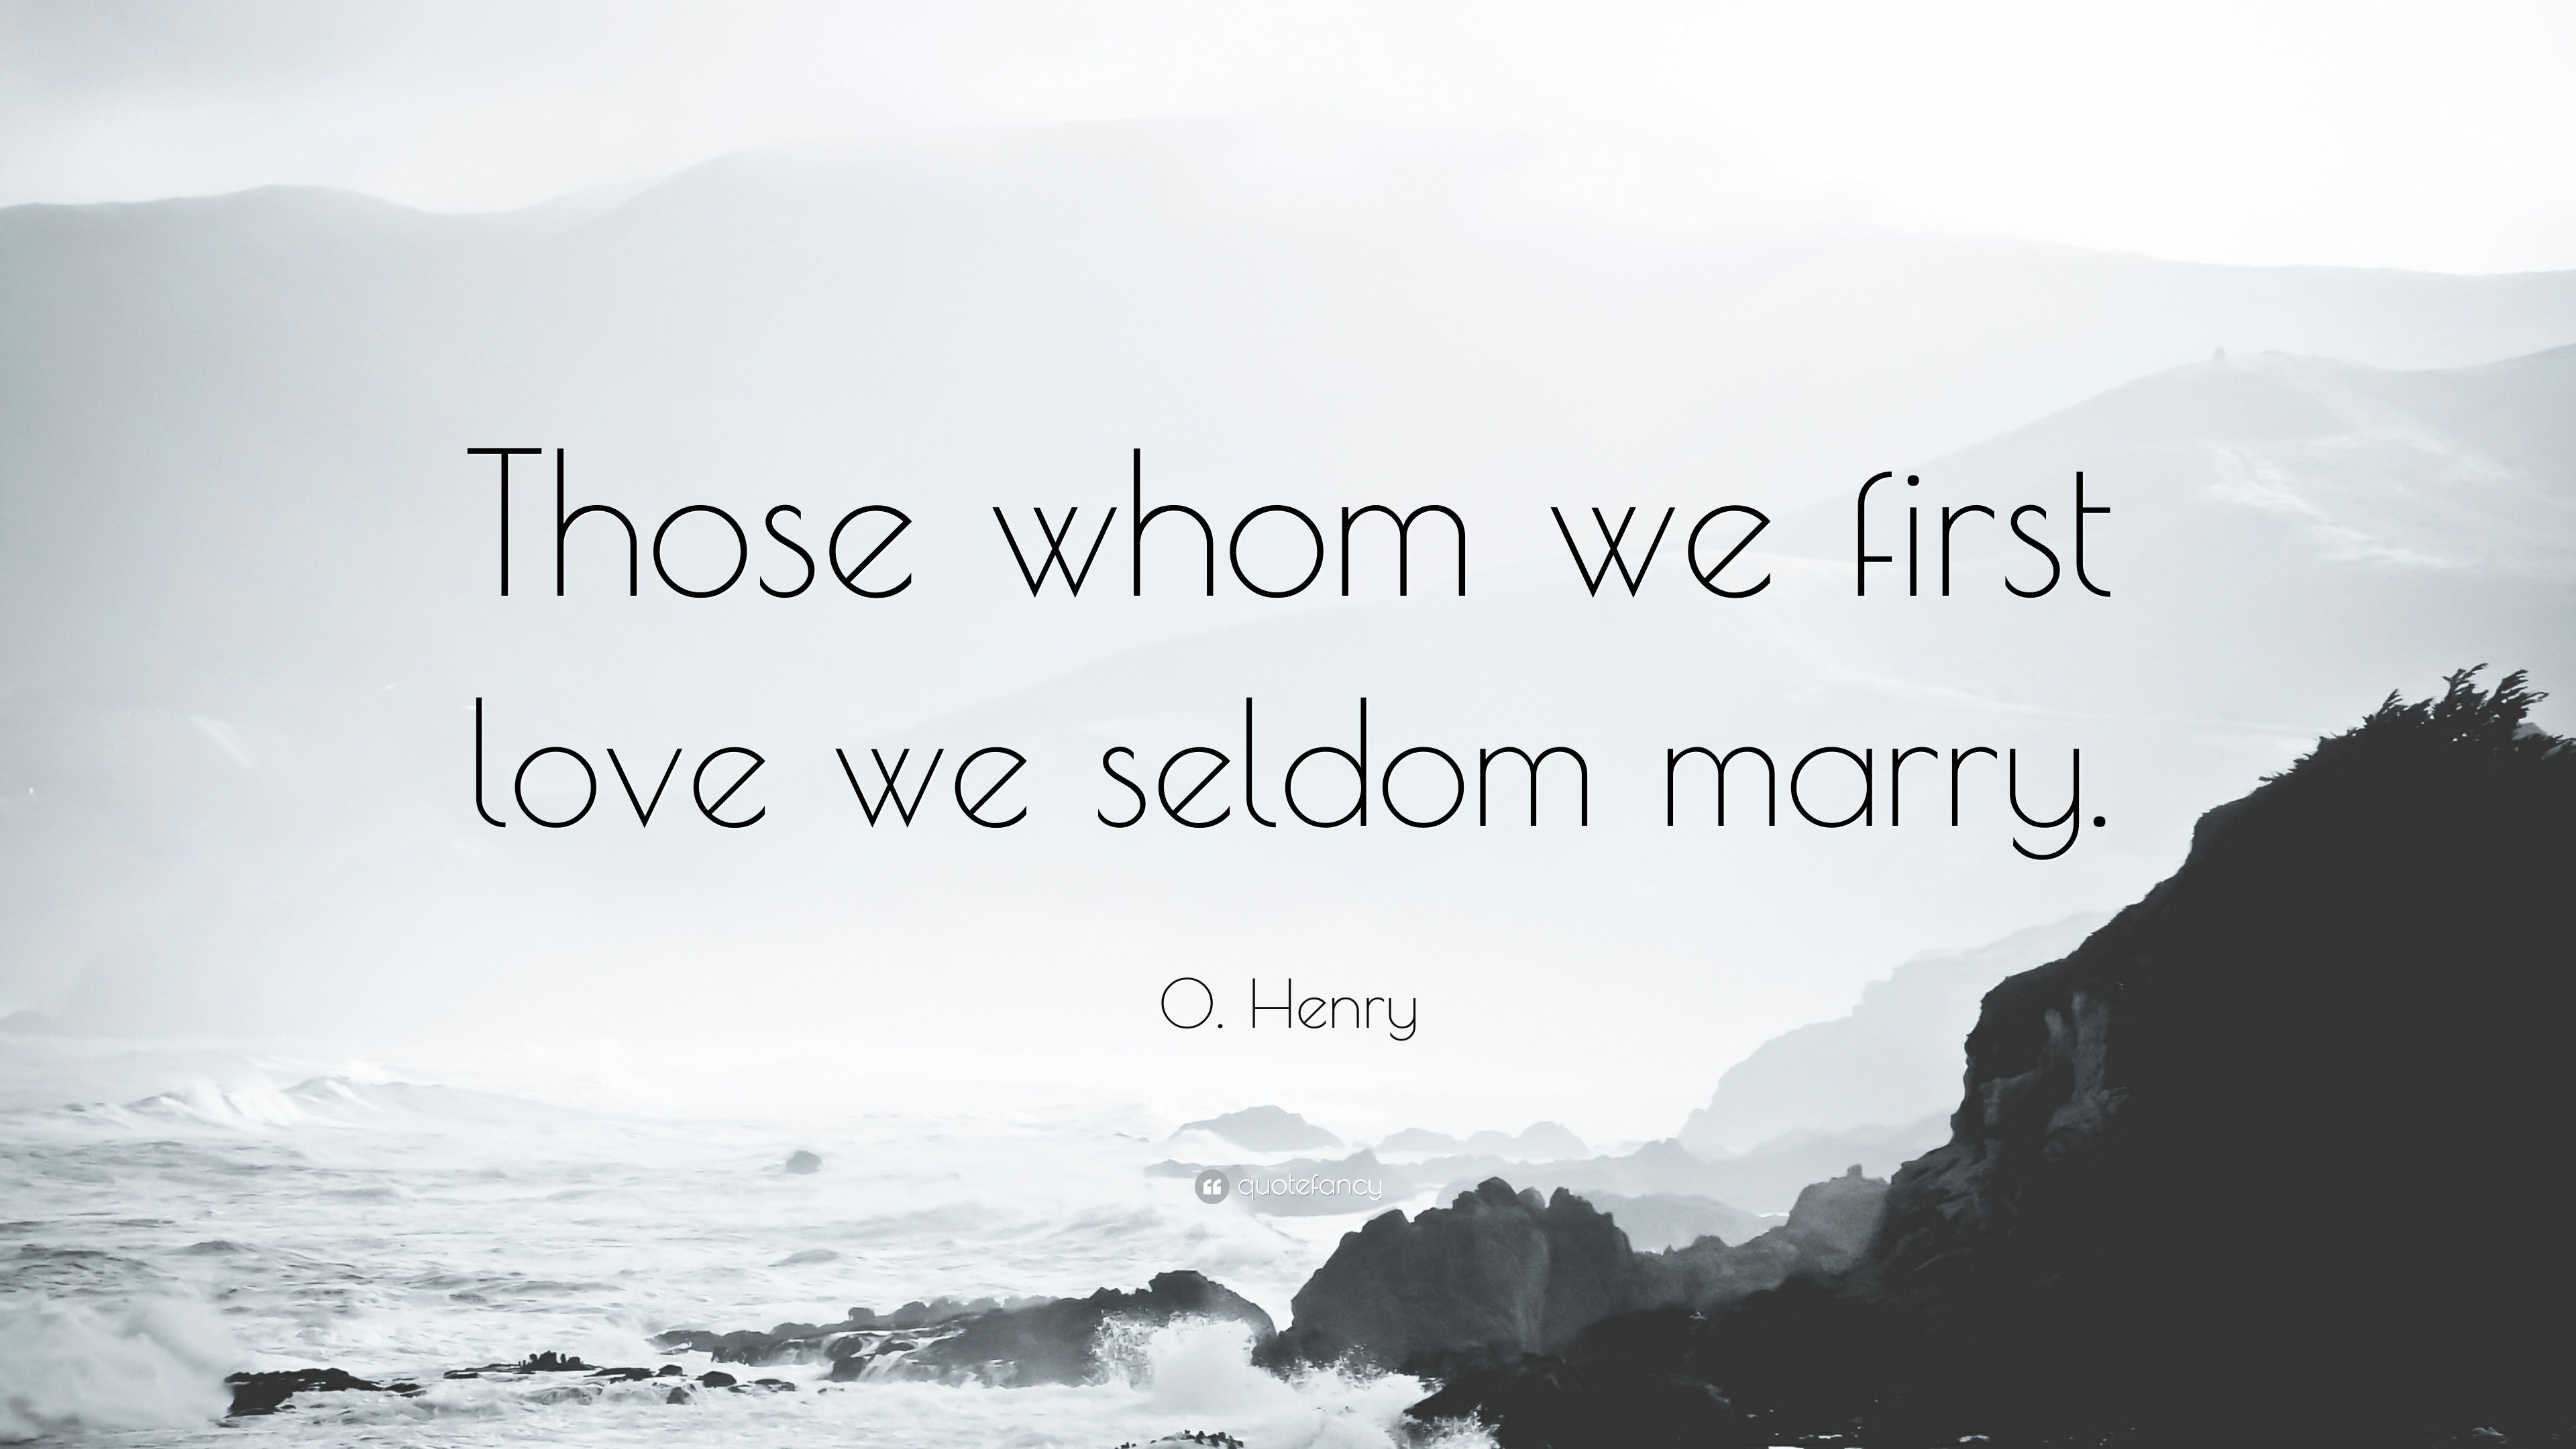 O. Henry Quote: "Those whom we first love we seldom marry."